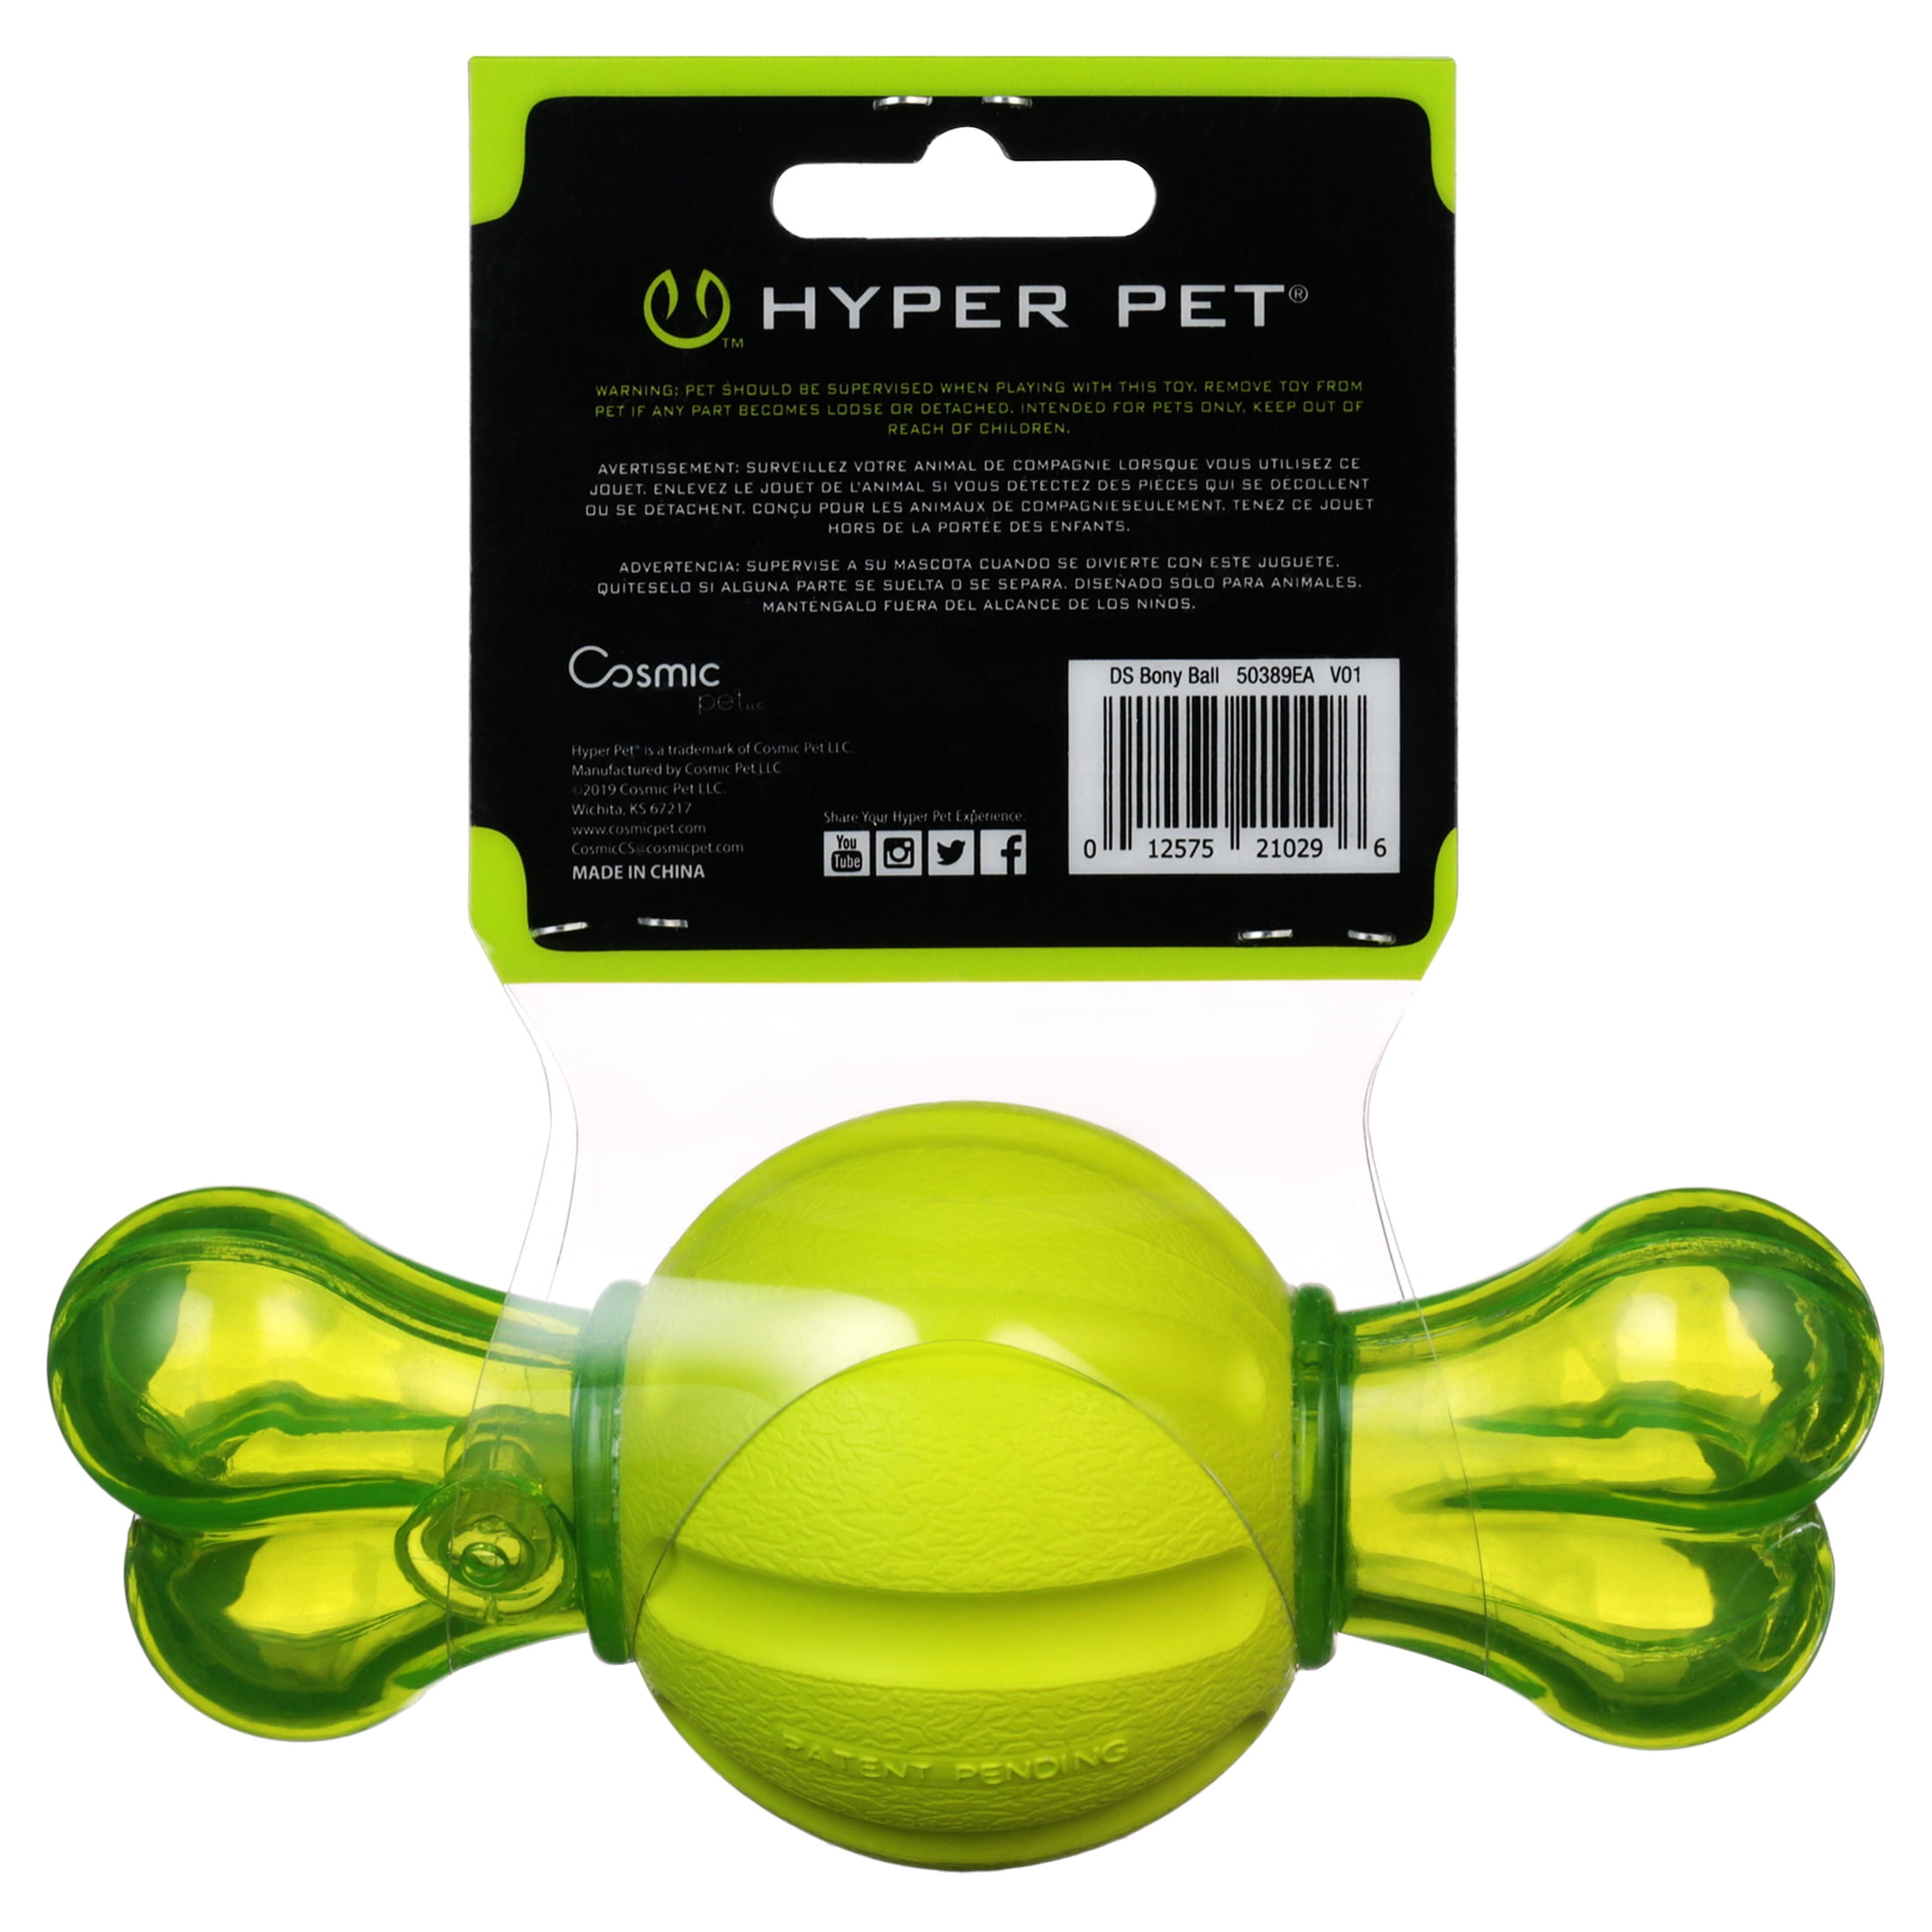 Hyper Pet™ Hyper Squawkers 3.5 Ball Dog Toy